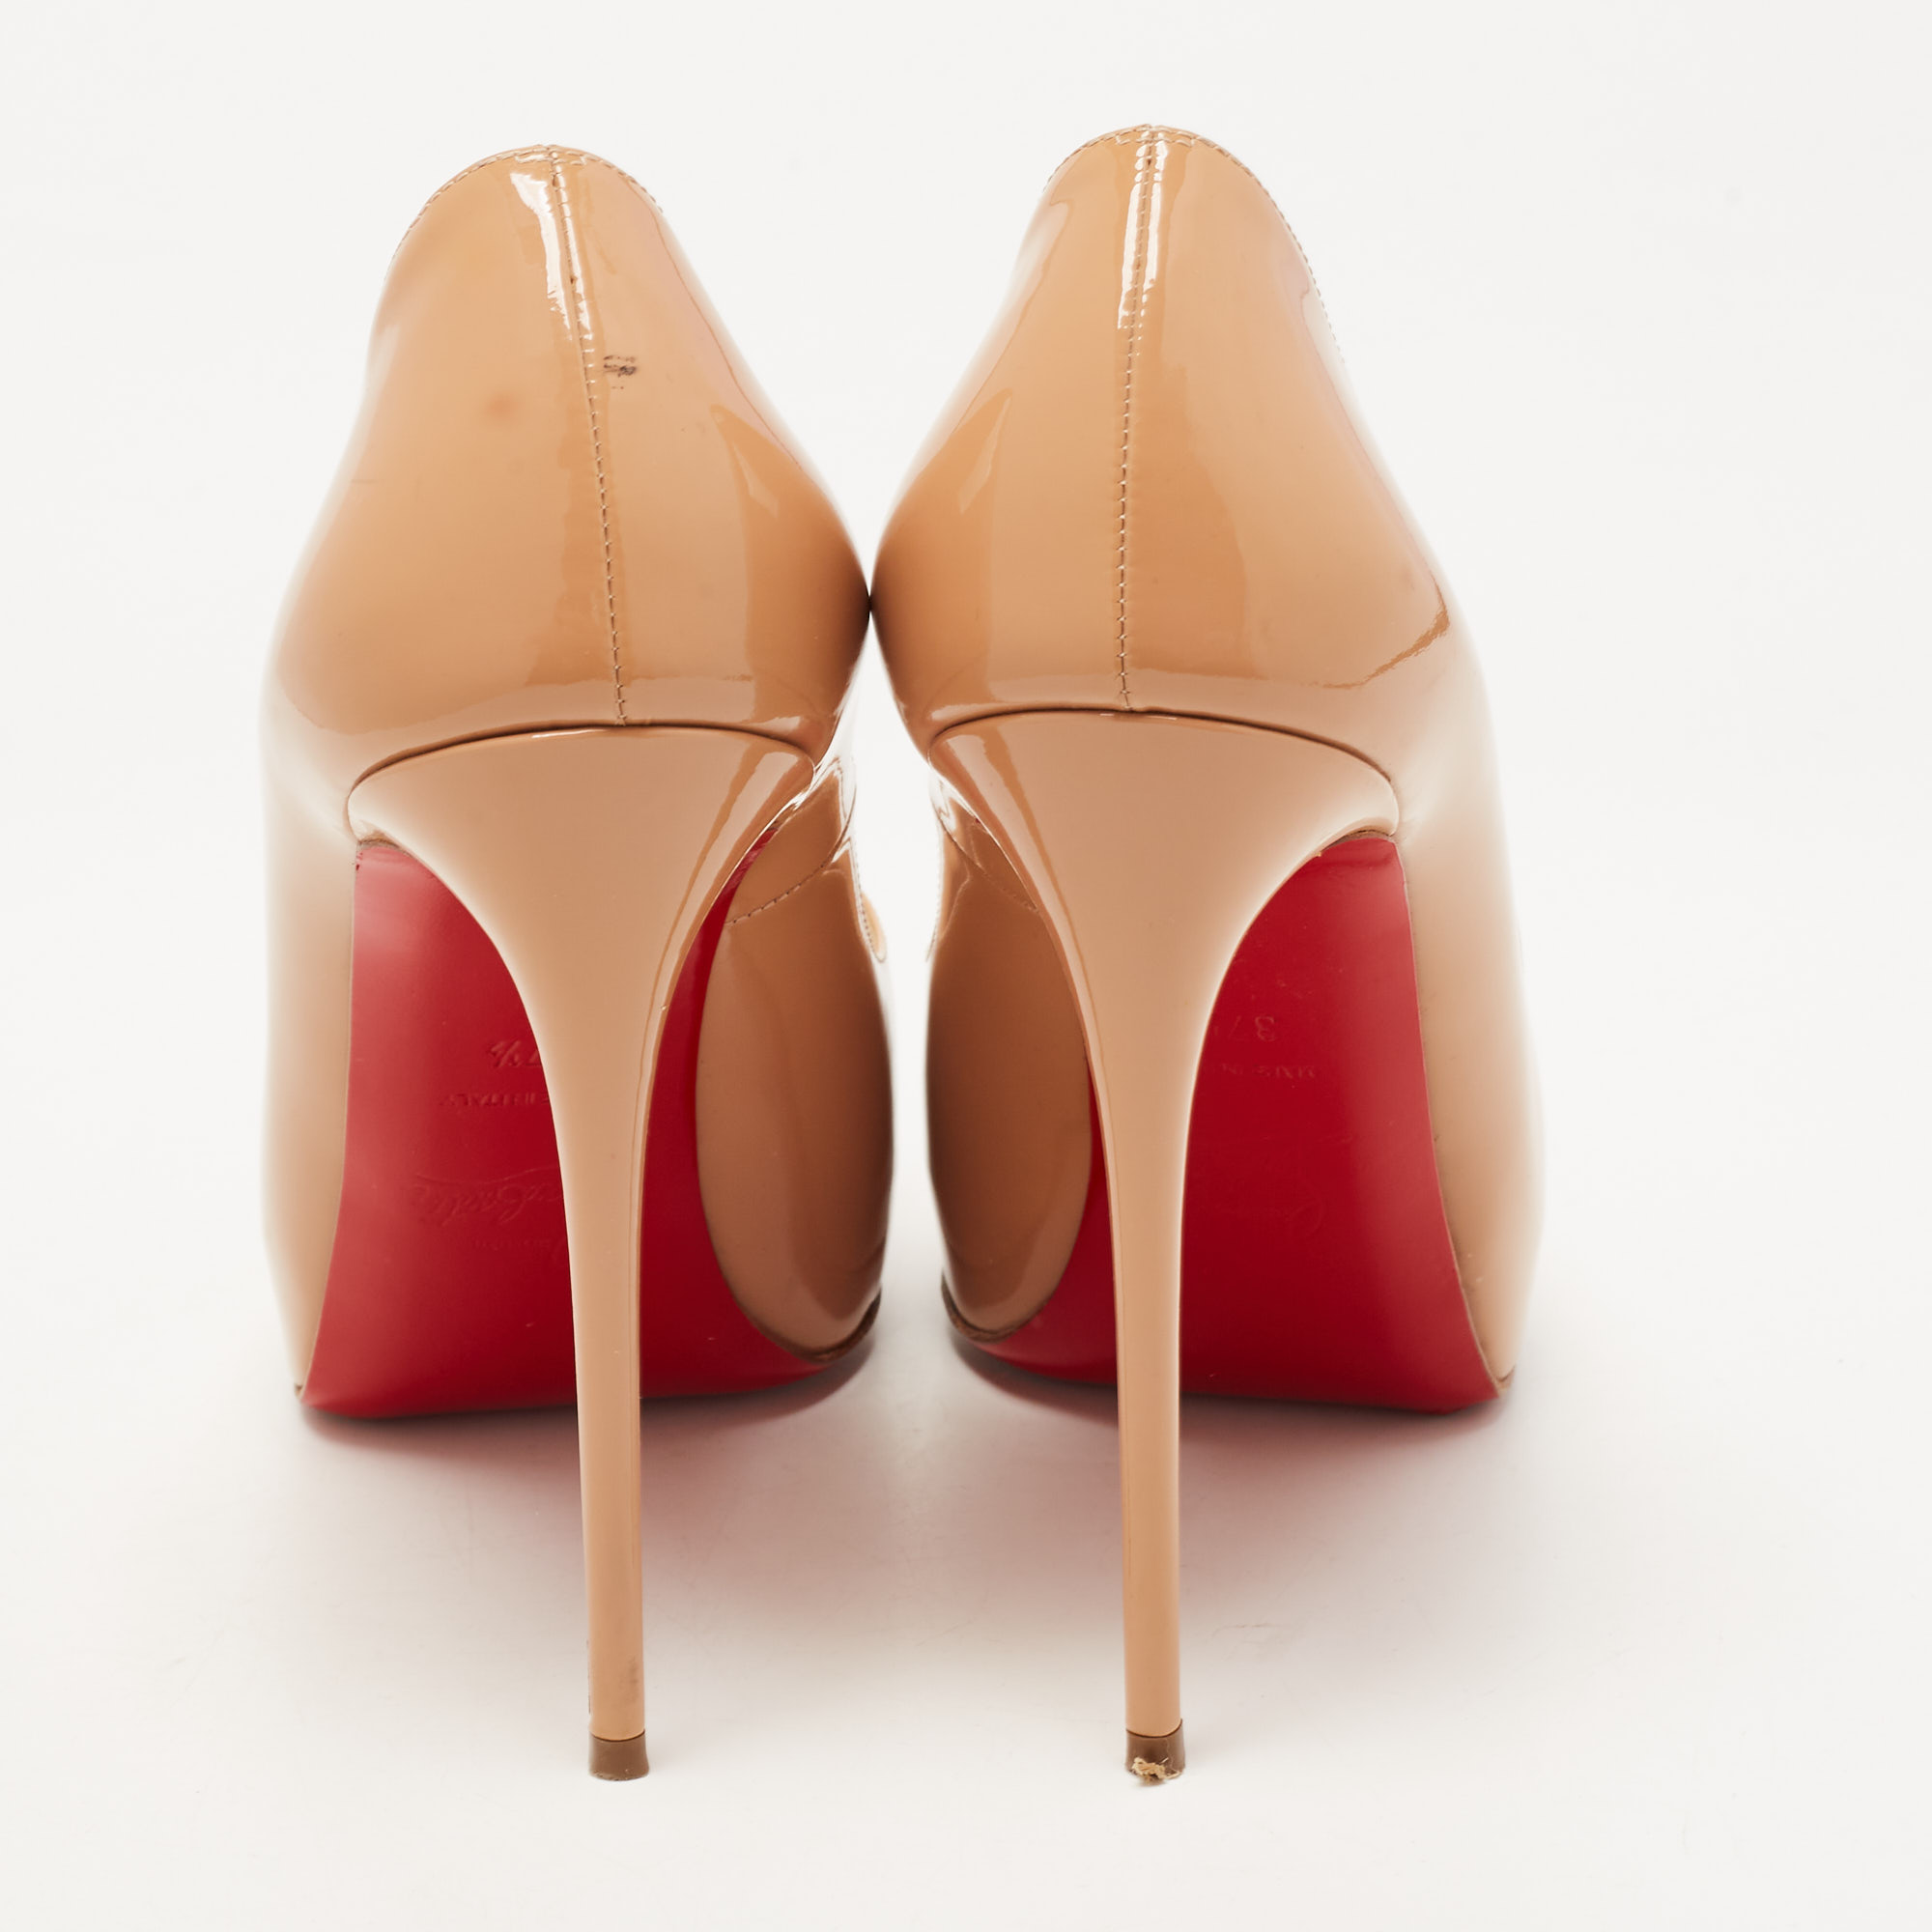 Christian Louboutin Beige Patent Leather New Very Prive Pumps Size 37.5